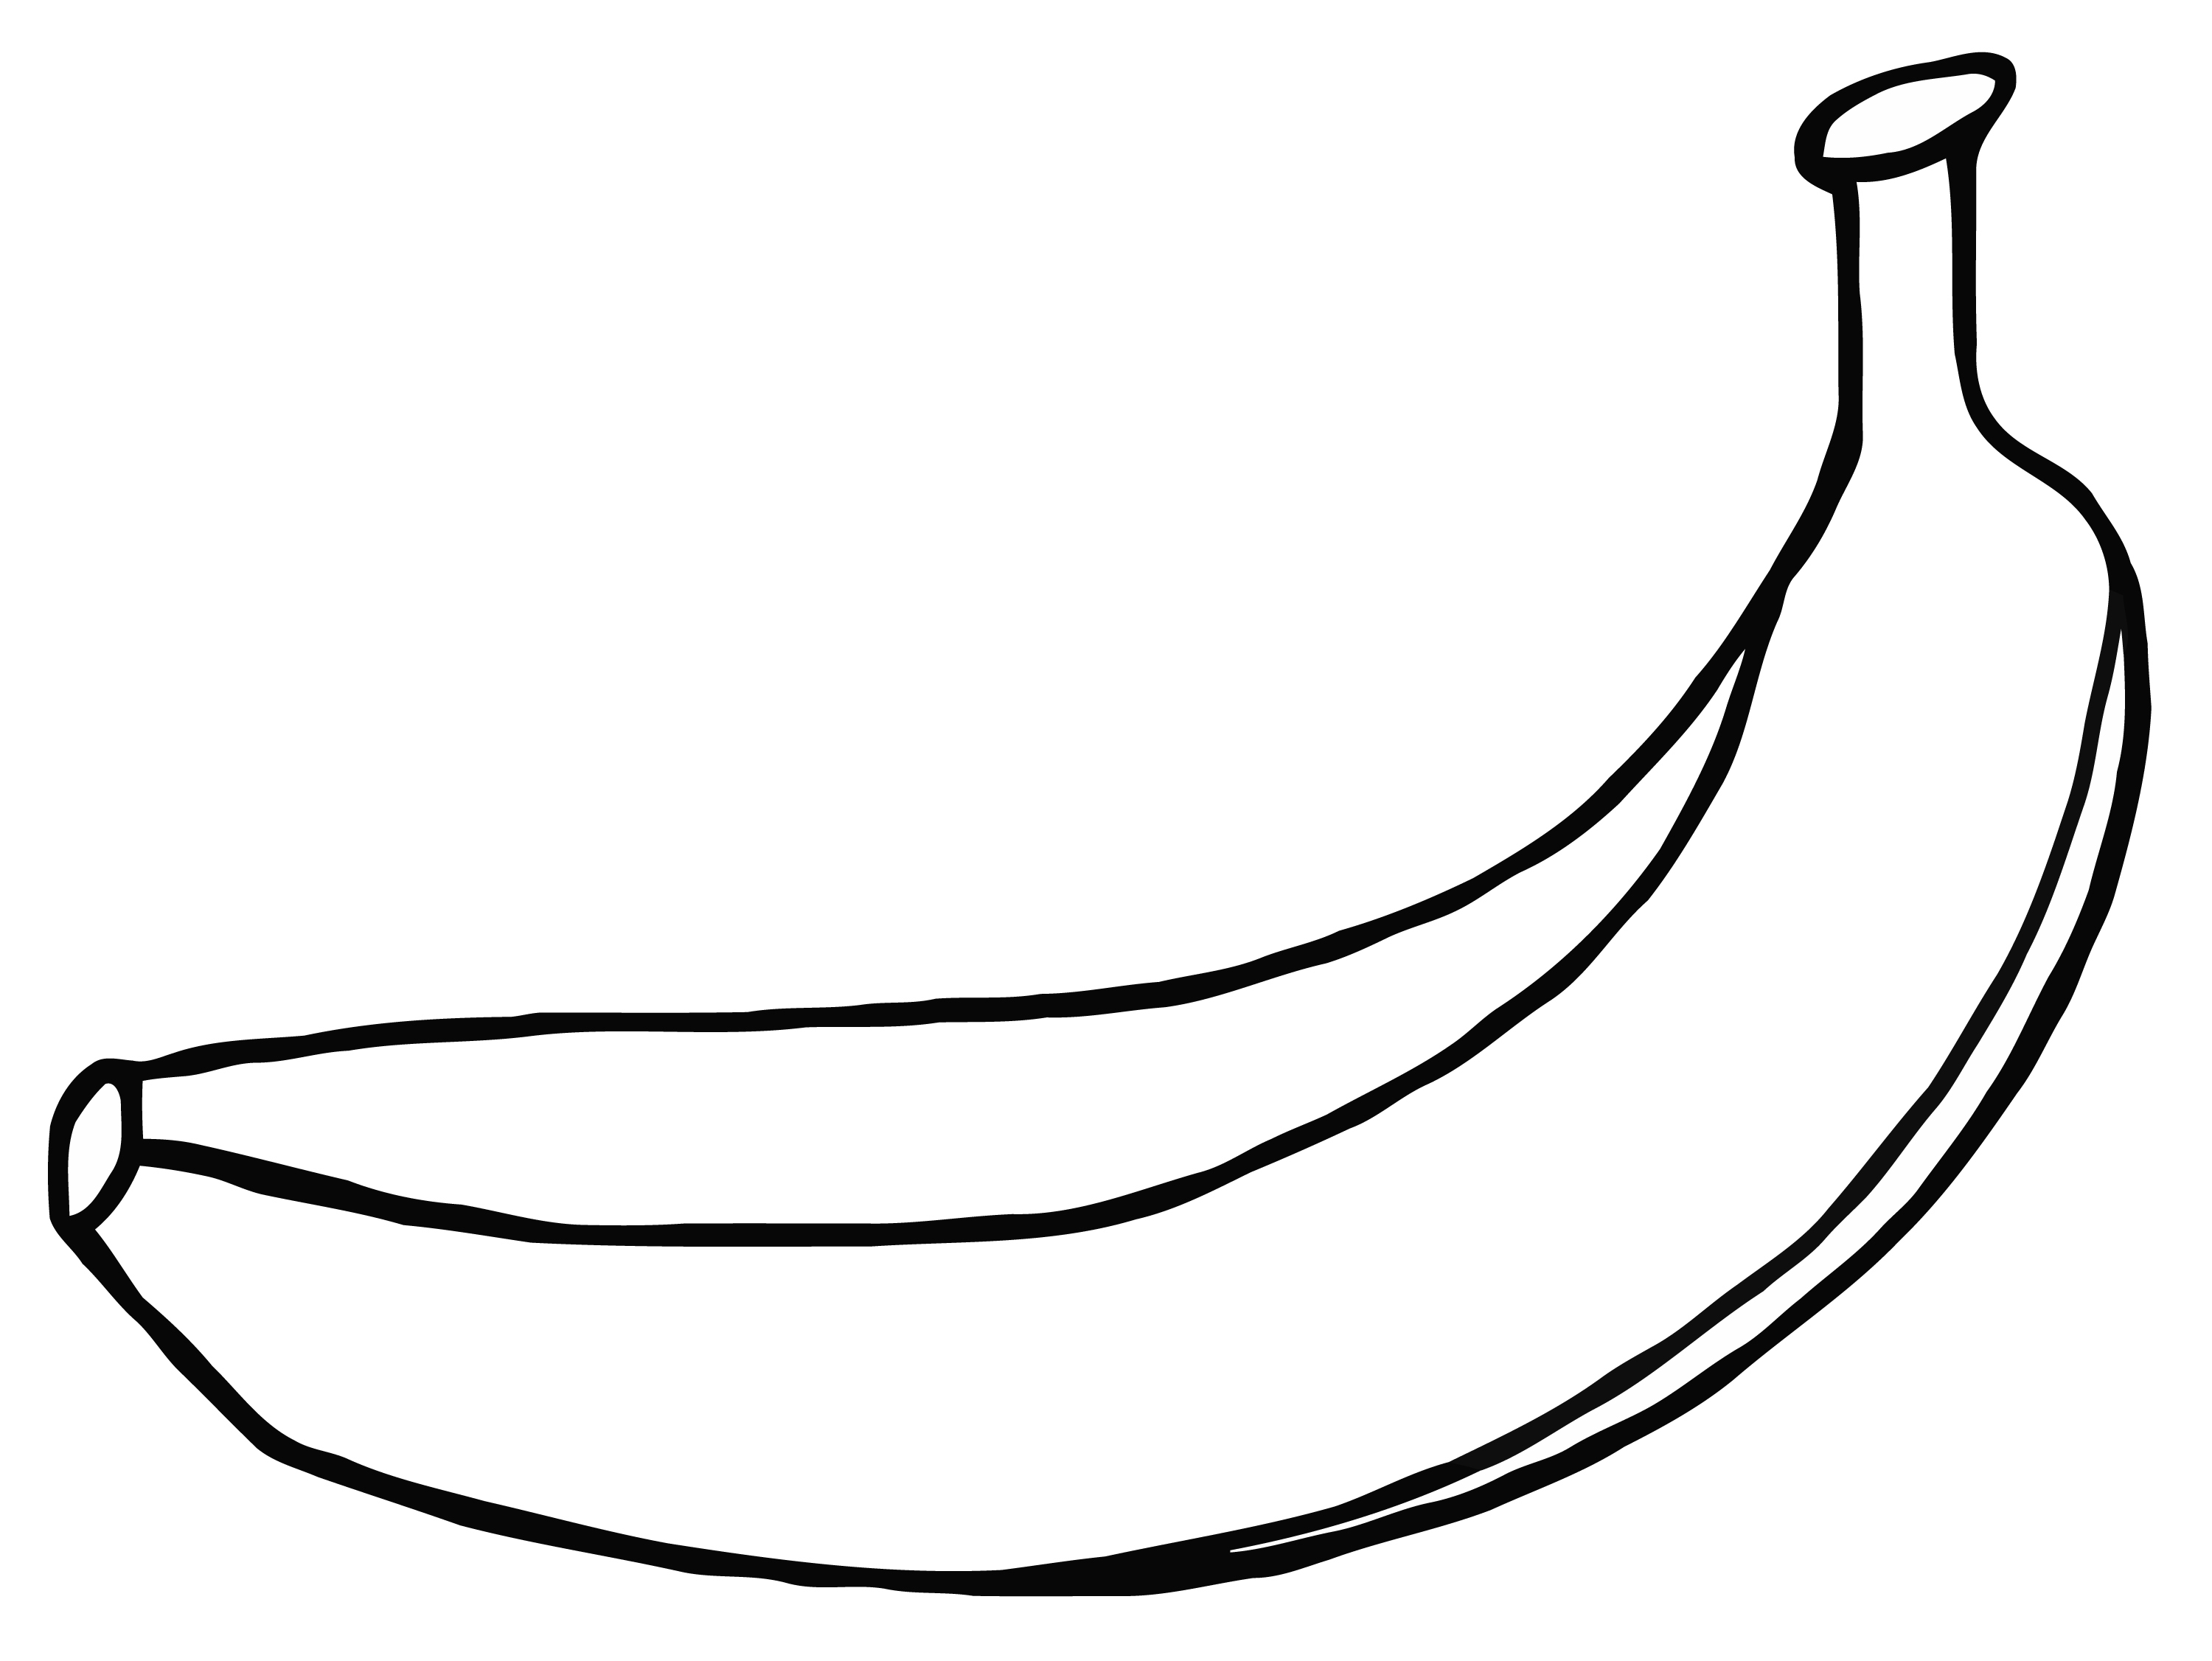 Image drawing template pencil. Clipart banana colored